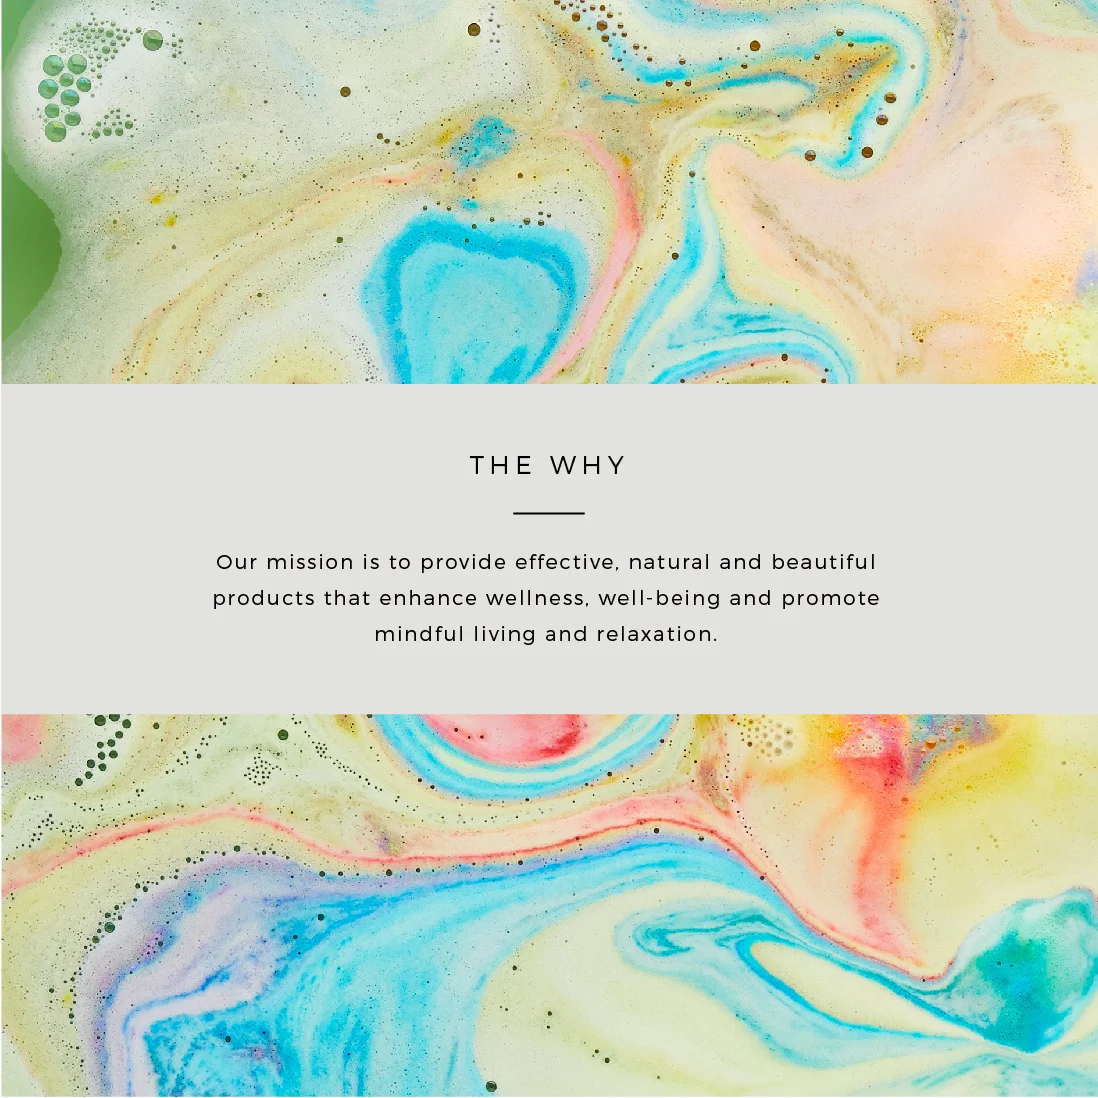 Abstract colorful marbled background in pastel tones with white space containing text that describes a mission statement focused on promoting wellness, well-being, and relaxation, crafted by a design agency Wales.